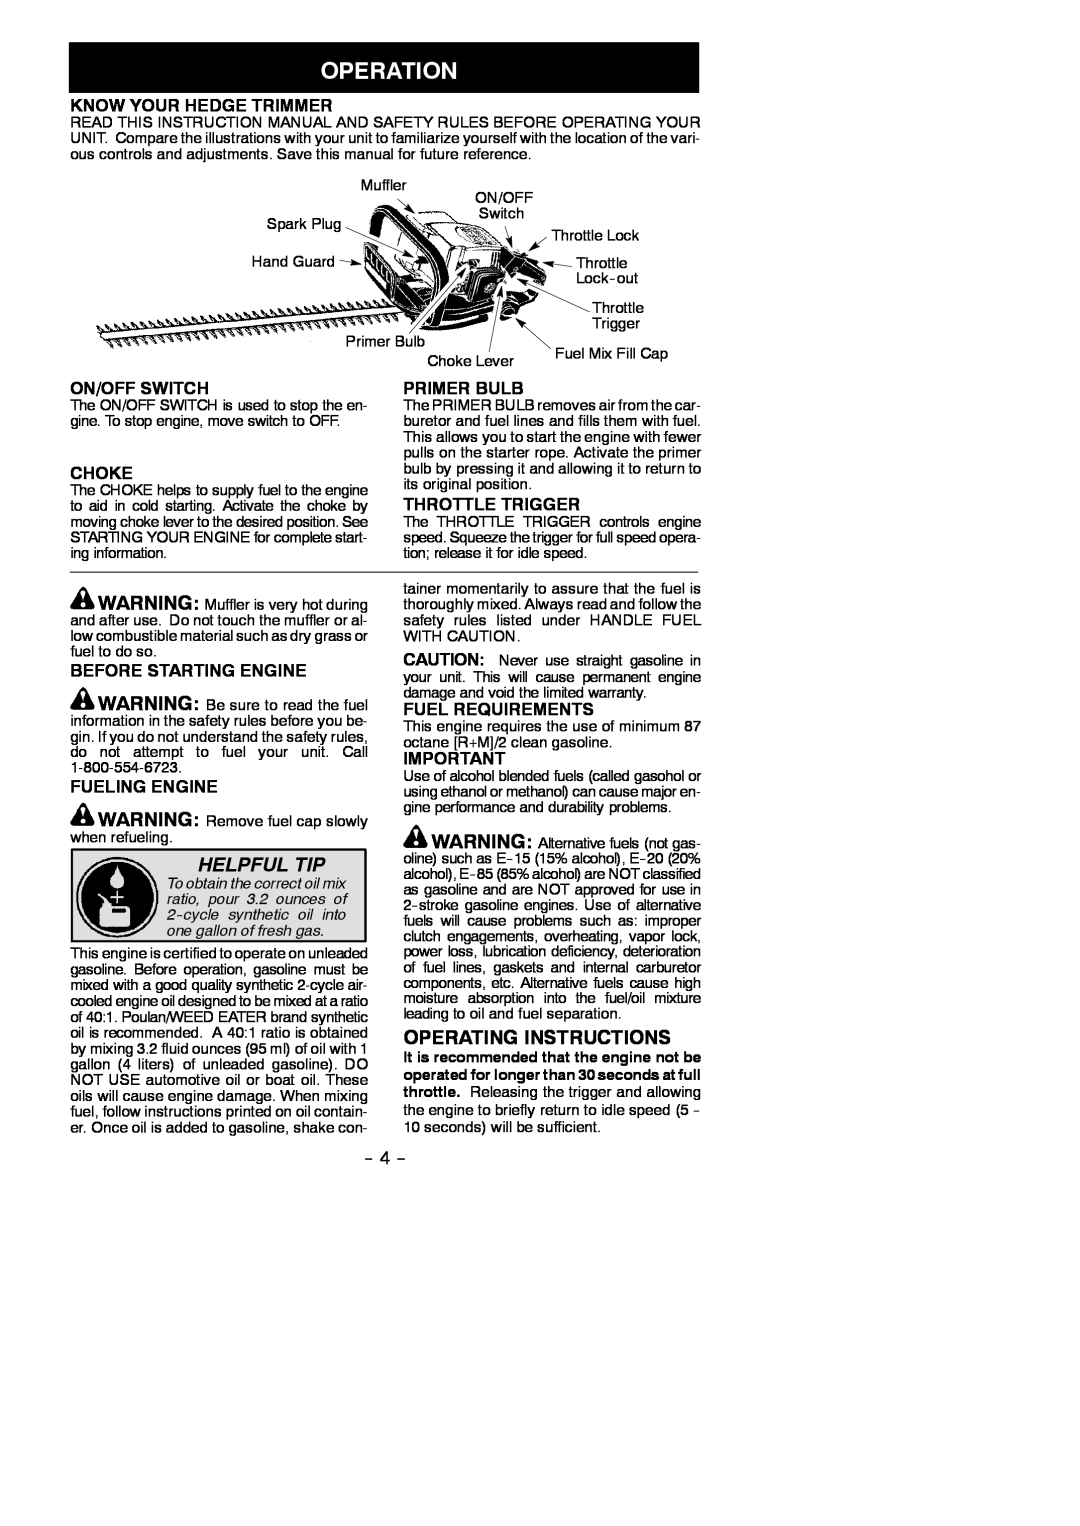 Weed Eater GHT 225 Operation, Helpful Tip, Operating Instructions, Know Your Hedge Trimmer, On/Off Switch, Primer Bulb 